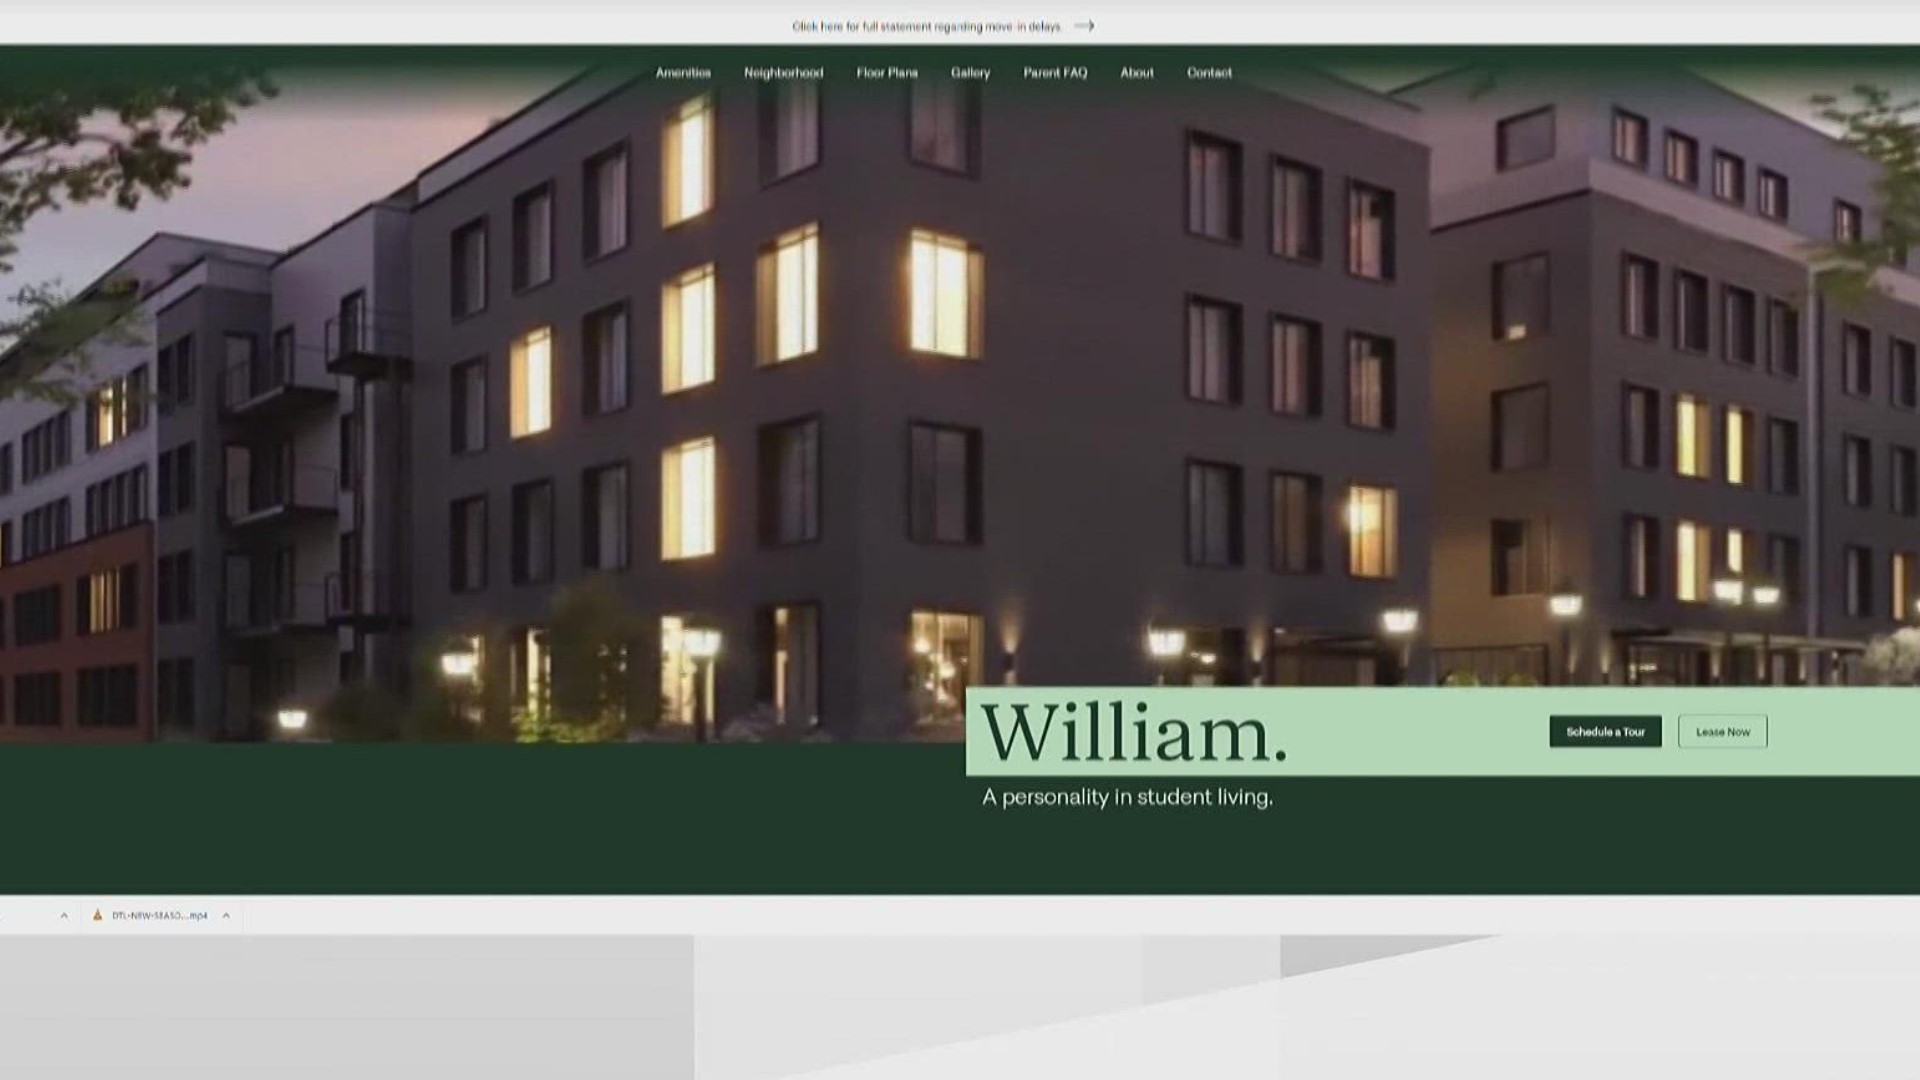 The new complex, The William, is off West Broad Street in Athens, just a short walk from campus.